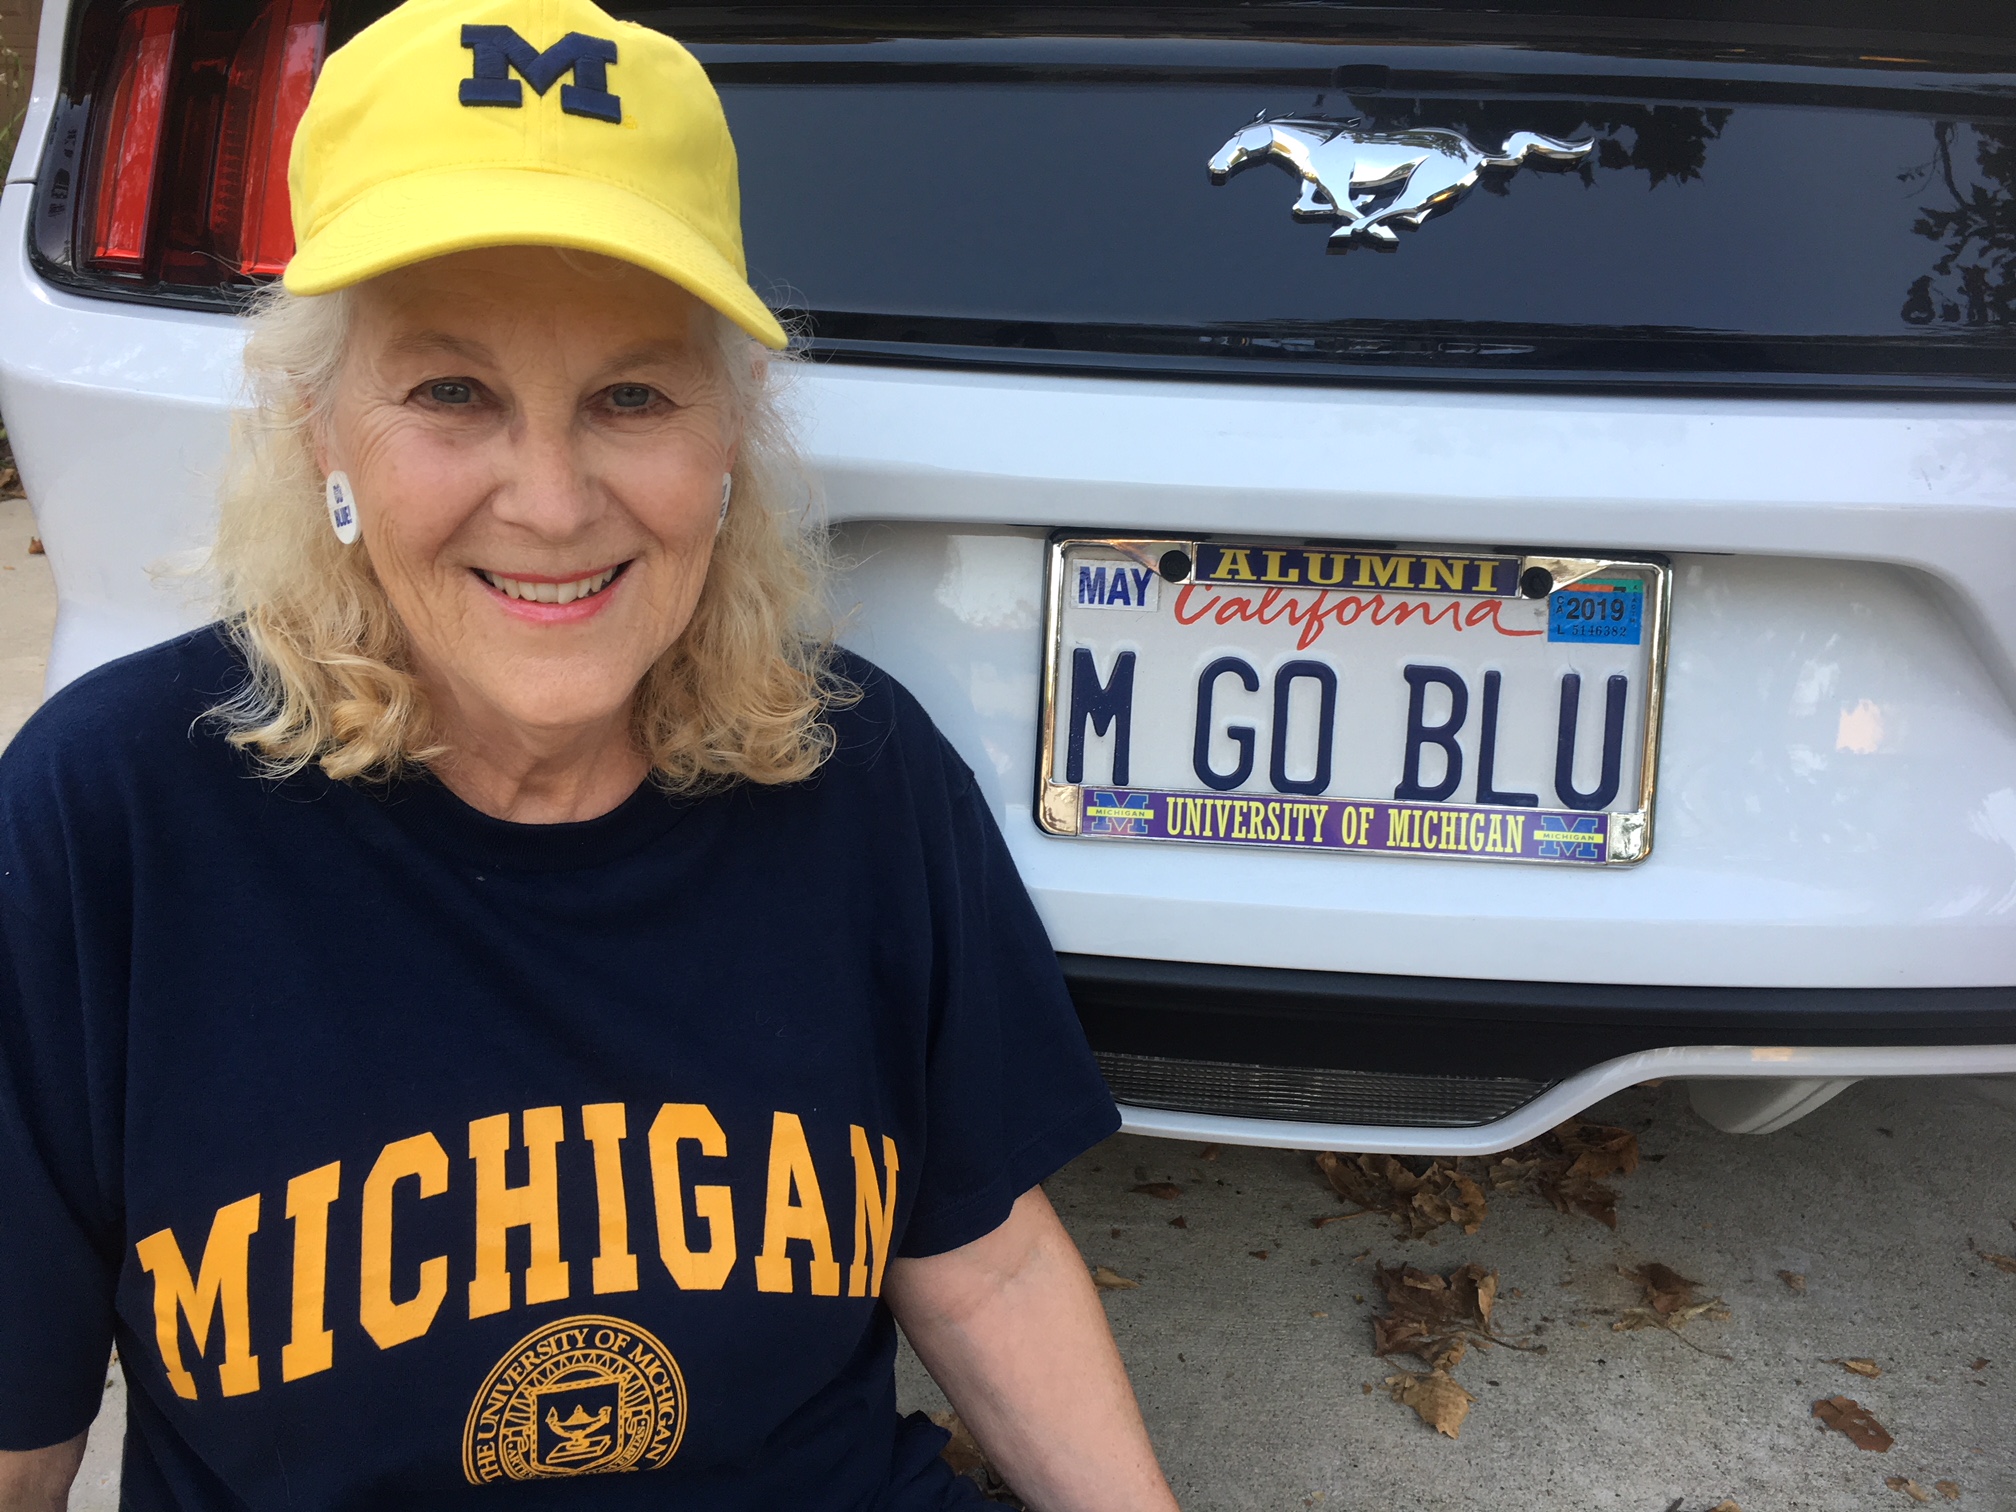 Upon learning in 1980 that the GOBLUE plate was already taken in California, Maureen Jones, ’67, MA’72, selected the plate above. She says it has given her “years of joy,” with people honking as they pass and giving her the thumbs-up sign.